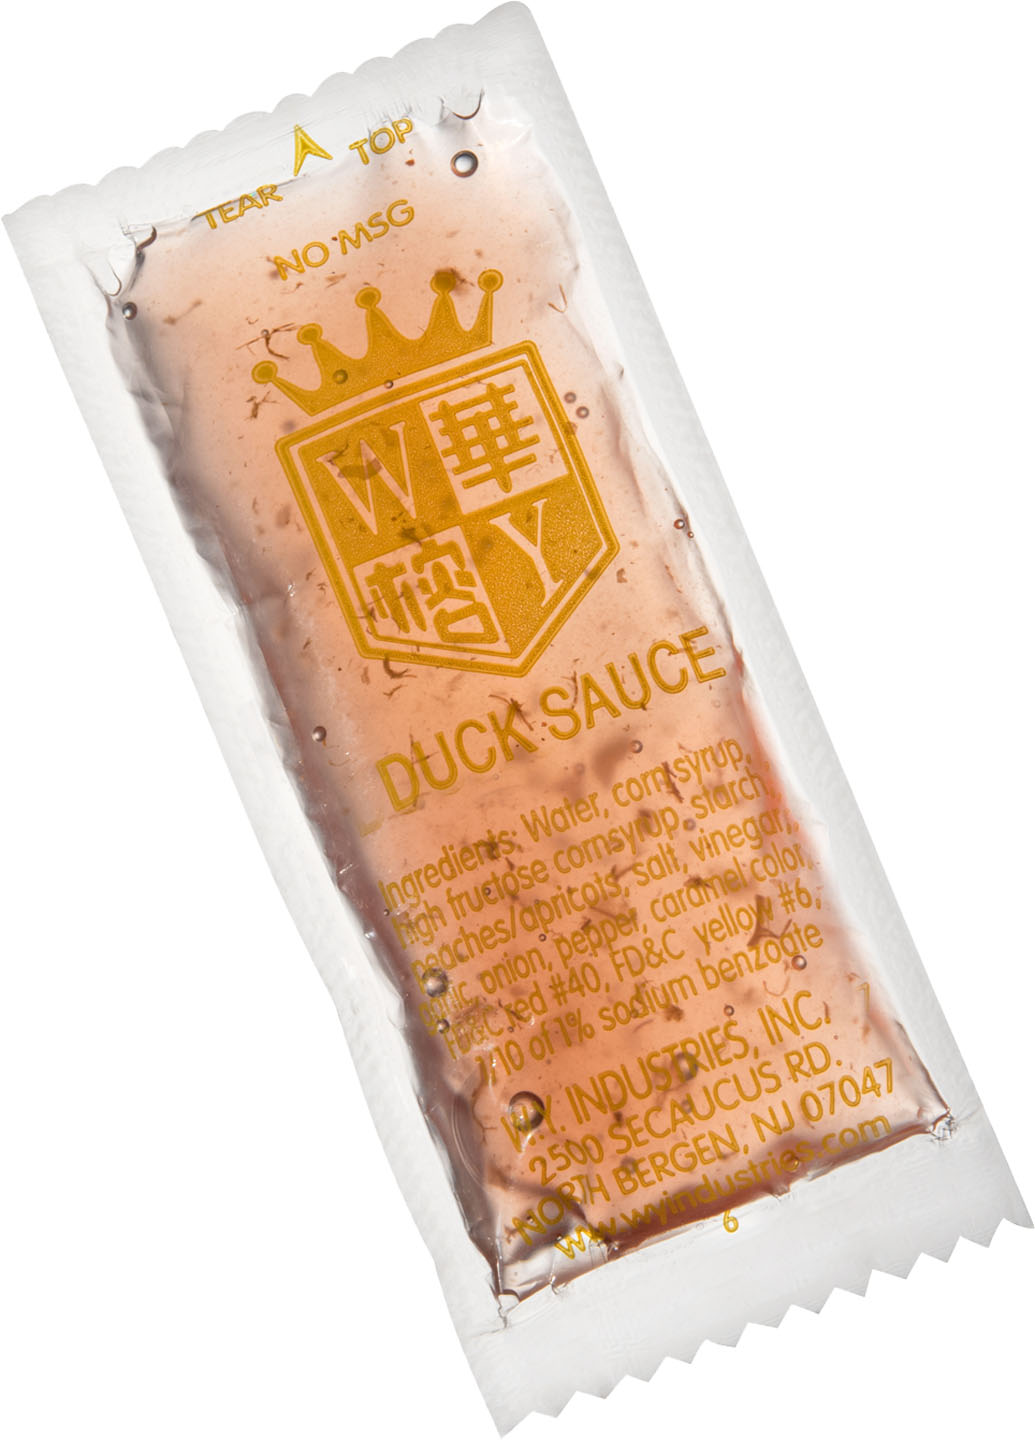 WY CONDIMENTS - DUCK SAUCE